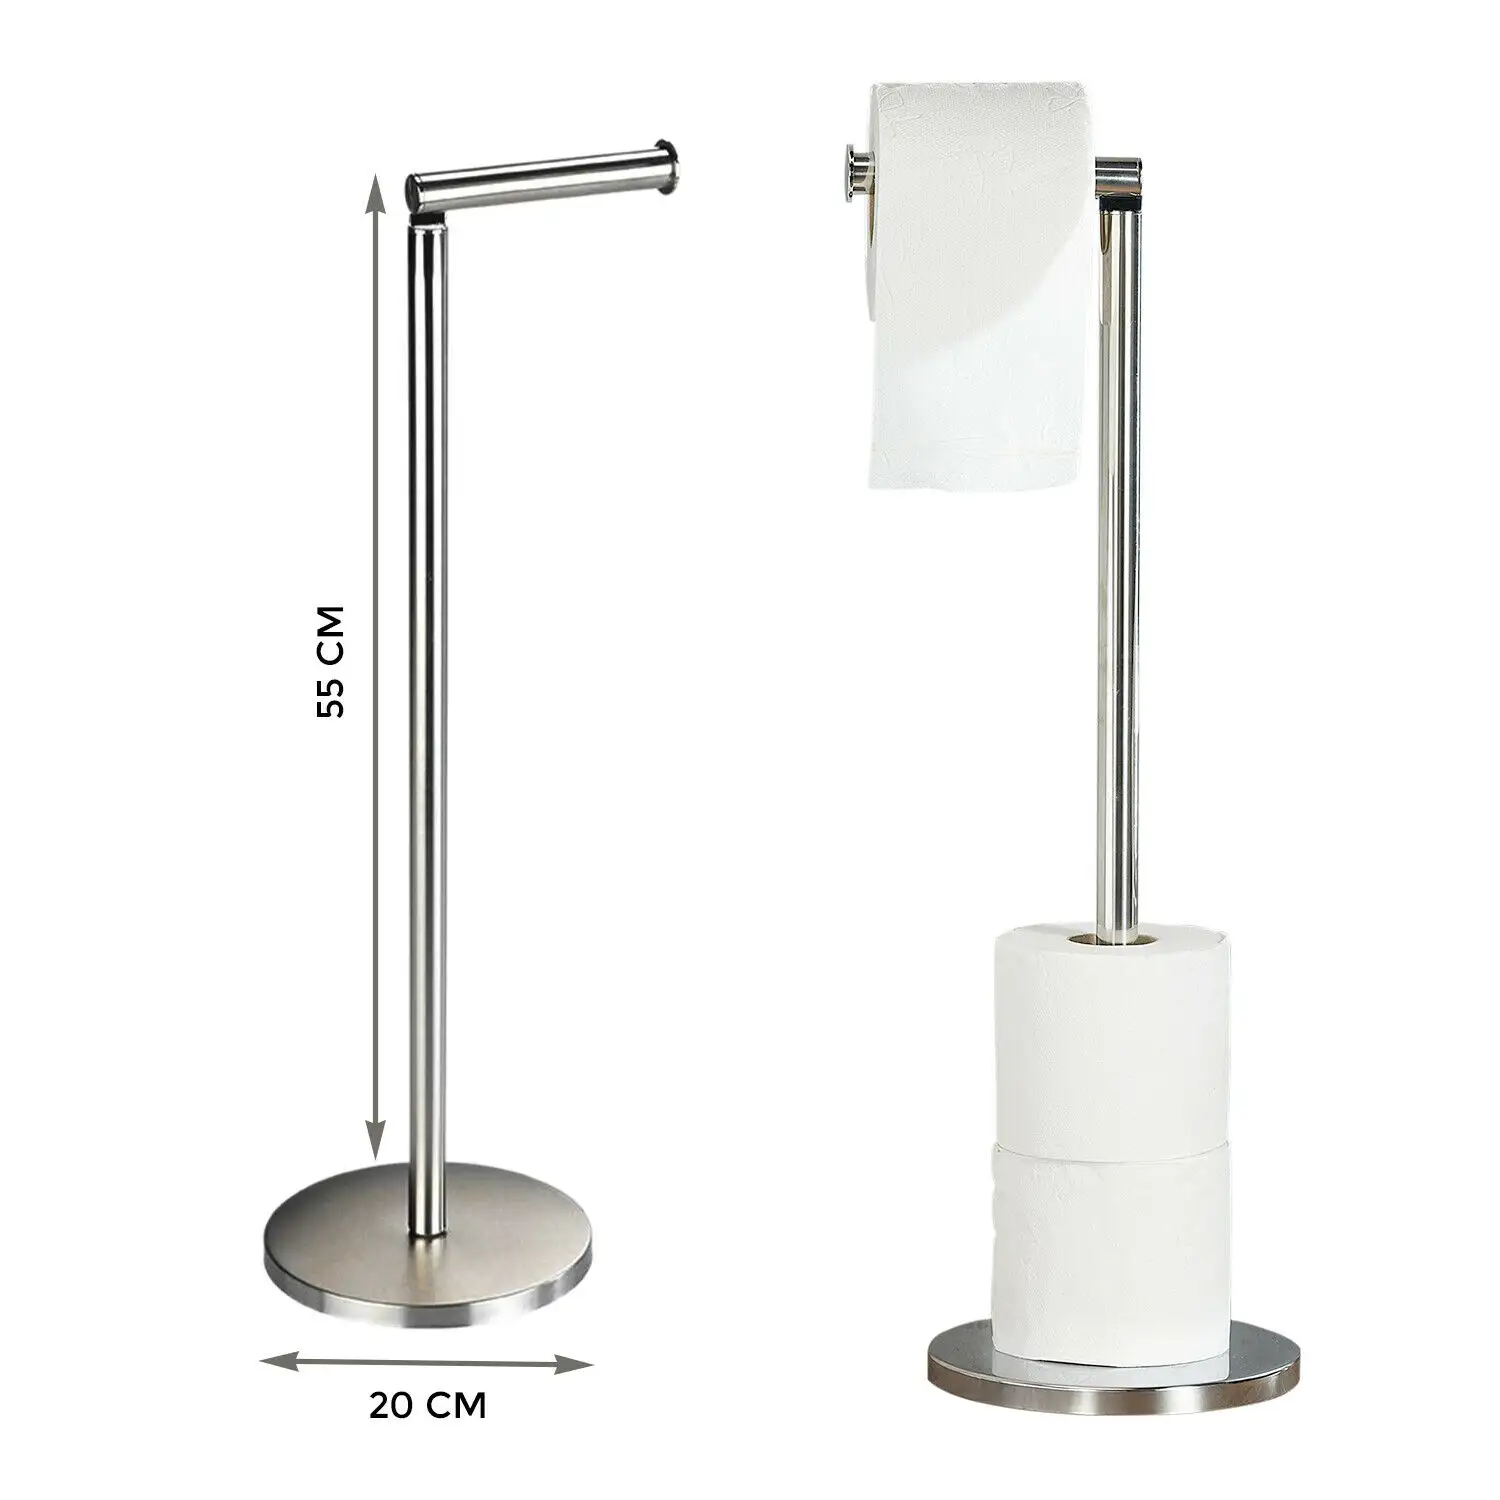 Toilet Roll Holder Free Standing Stainless Steel 2 In 1 Toilet Paper Stand